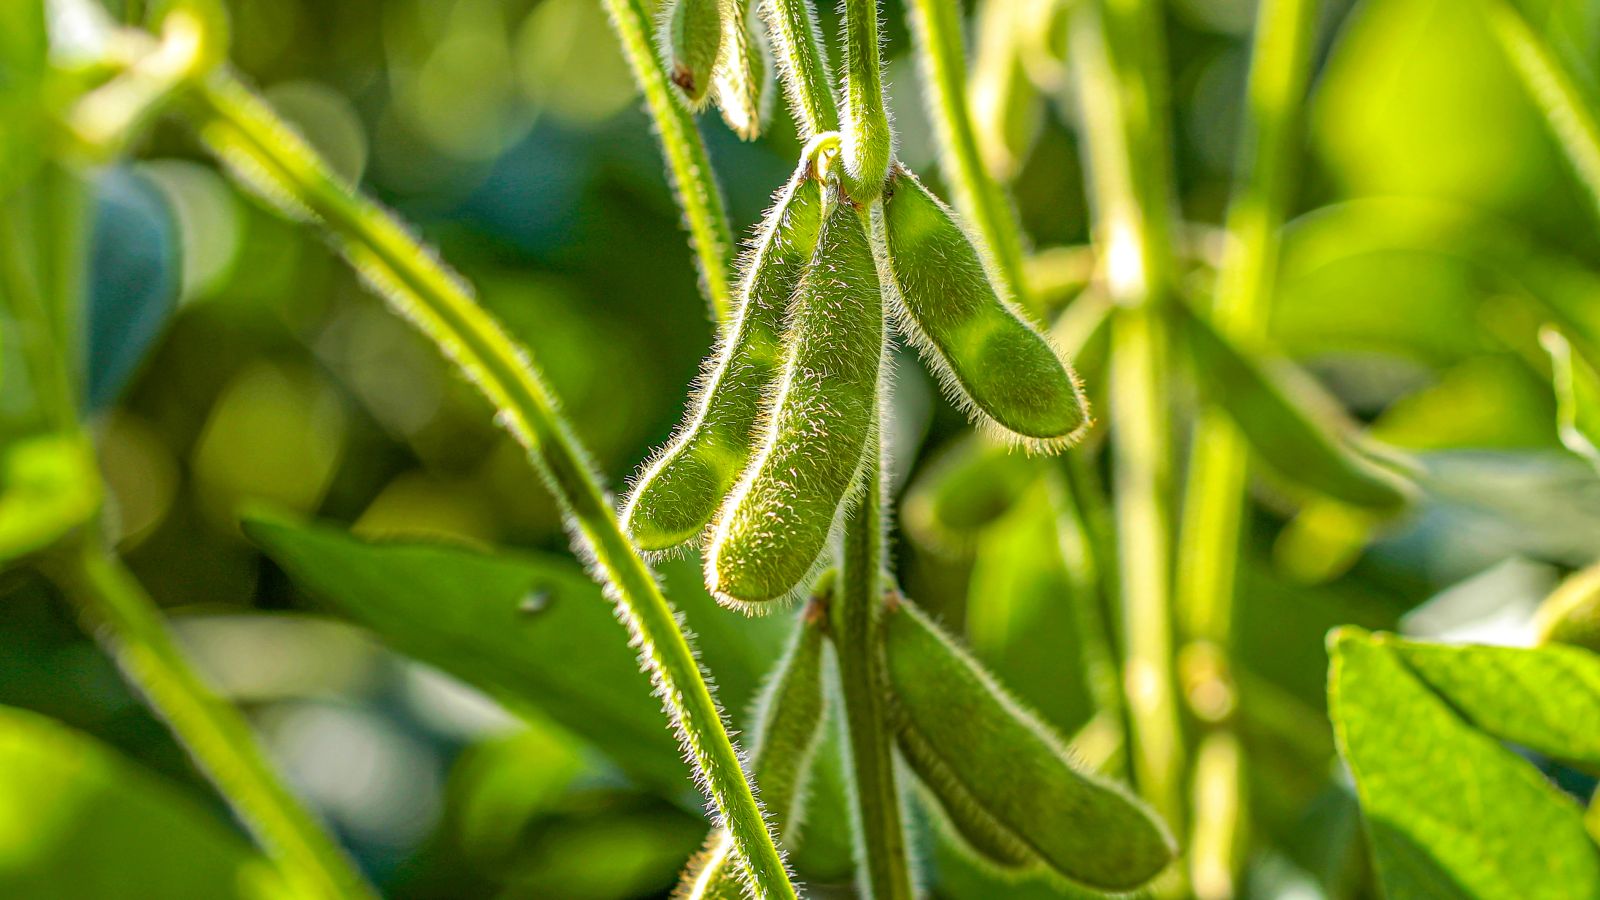 Soybeans - Soybean pods on plant by Mailson Pignata via iStock